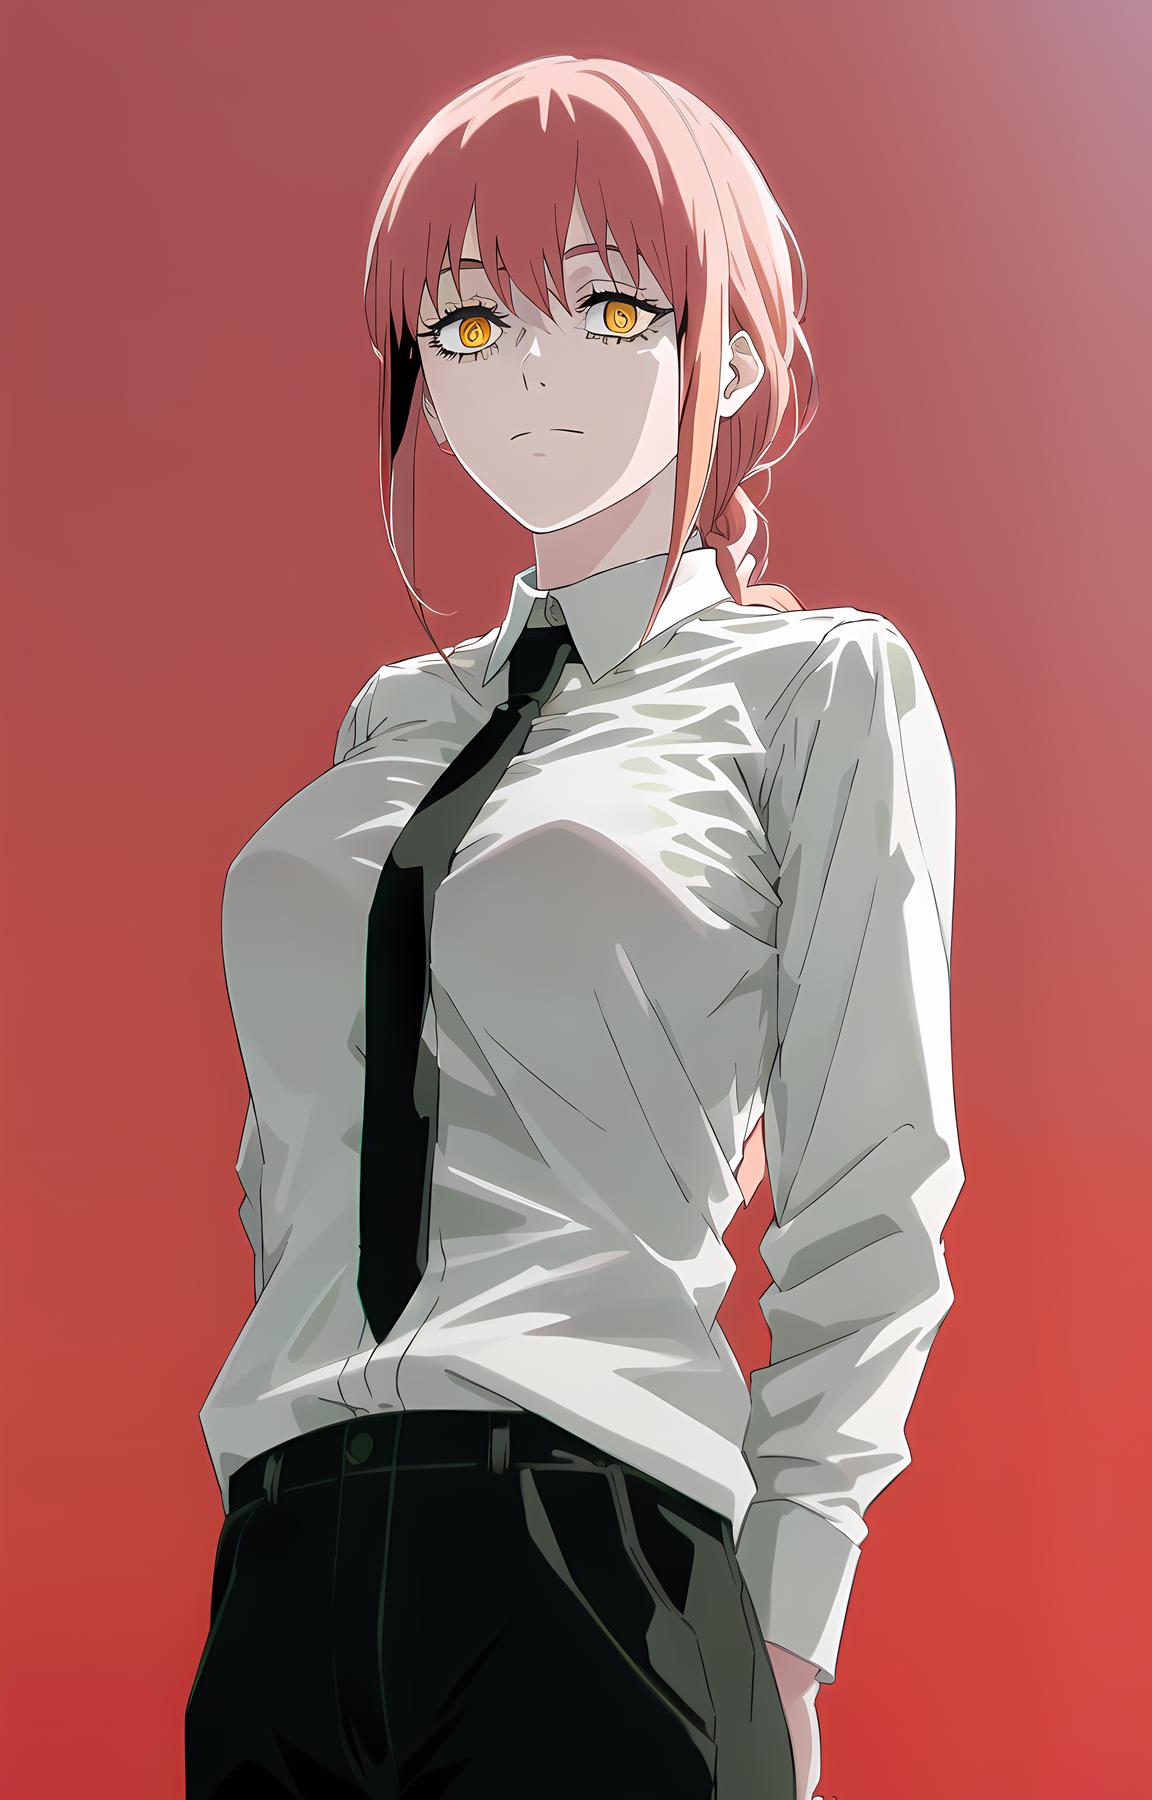 A woman wearing a white shirt and black tie standing in front of a red background.